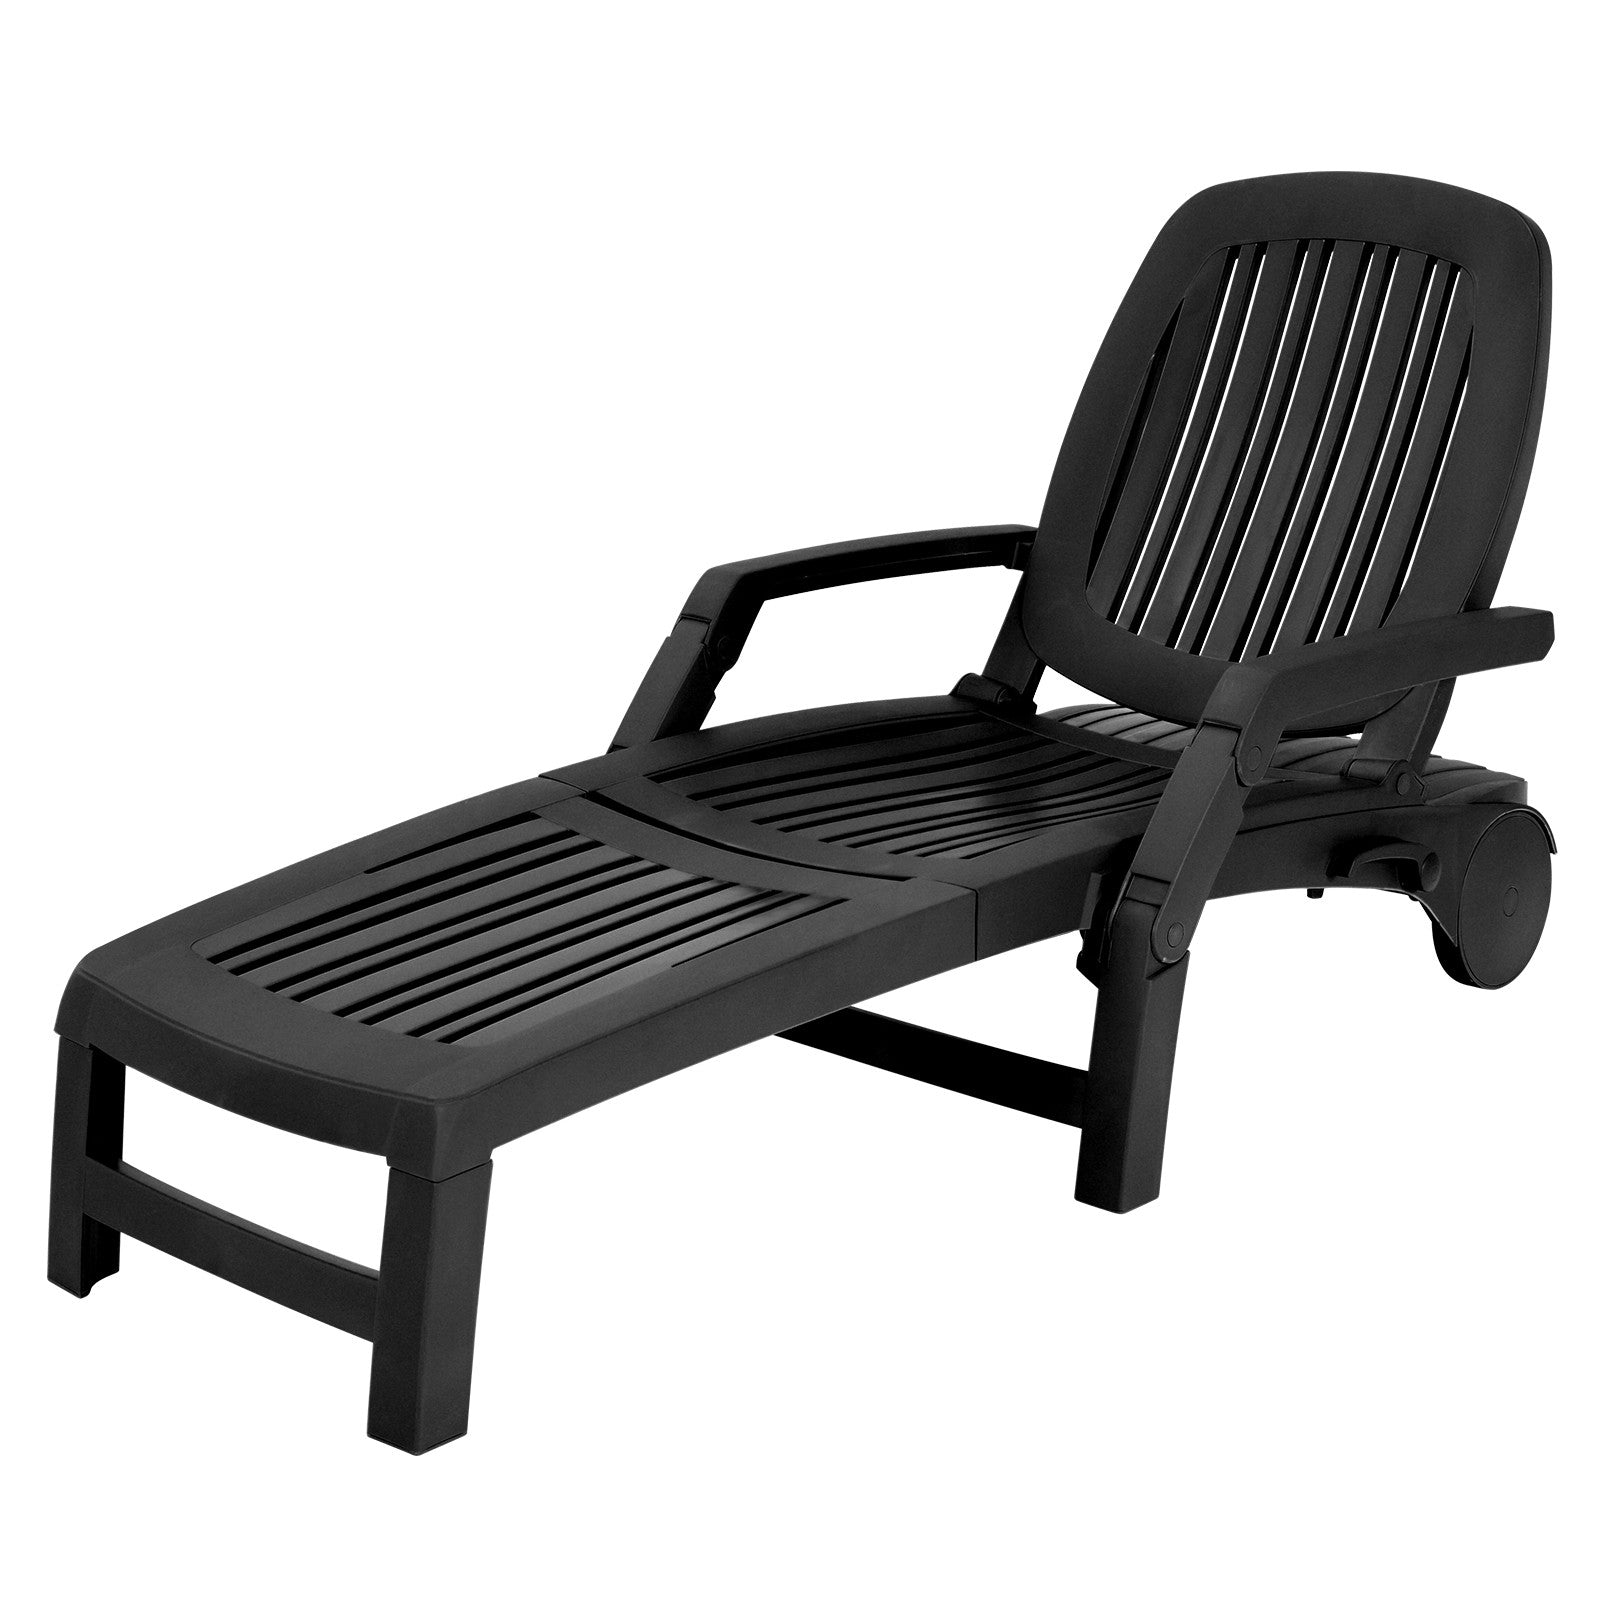 Chaise Lounge Outdoor,Foldable Sun Lounger with Wheels - Giantexus